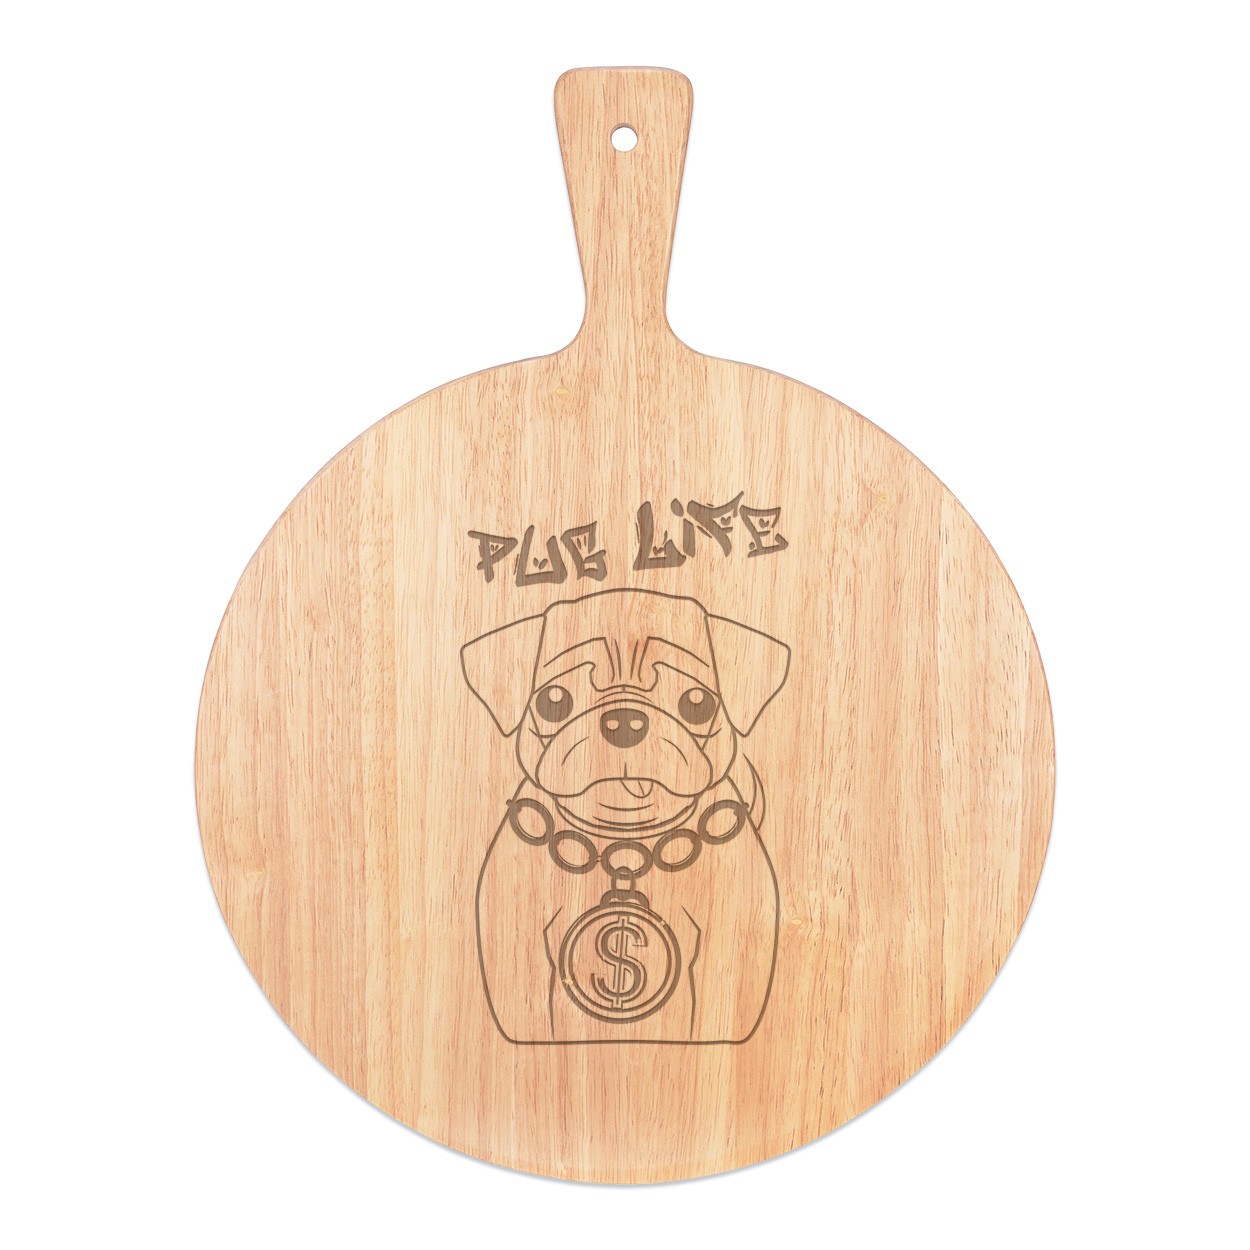 Pug Life Dog Pizza Board Paddle Serving Tray Handle Round Wooden 45x34cm